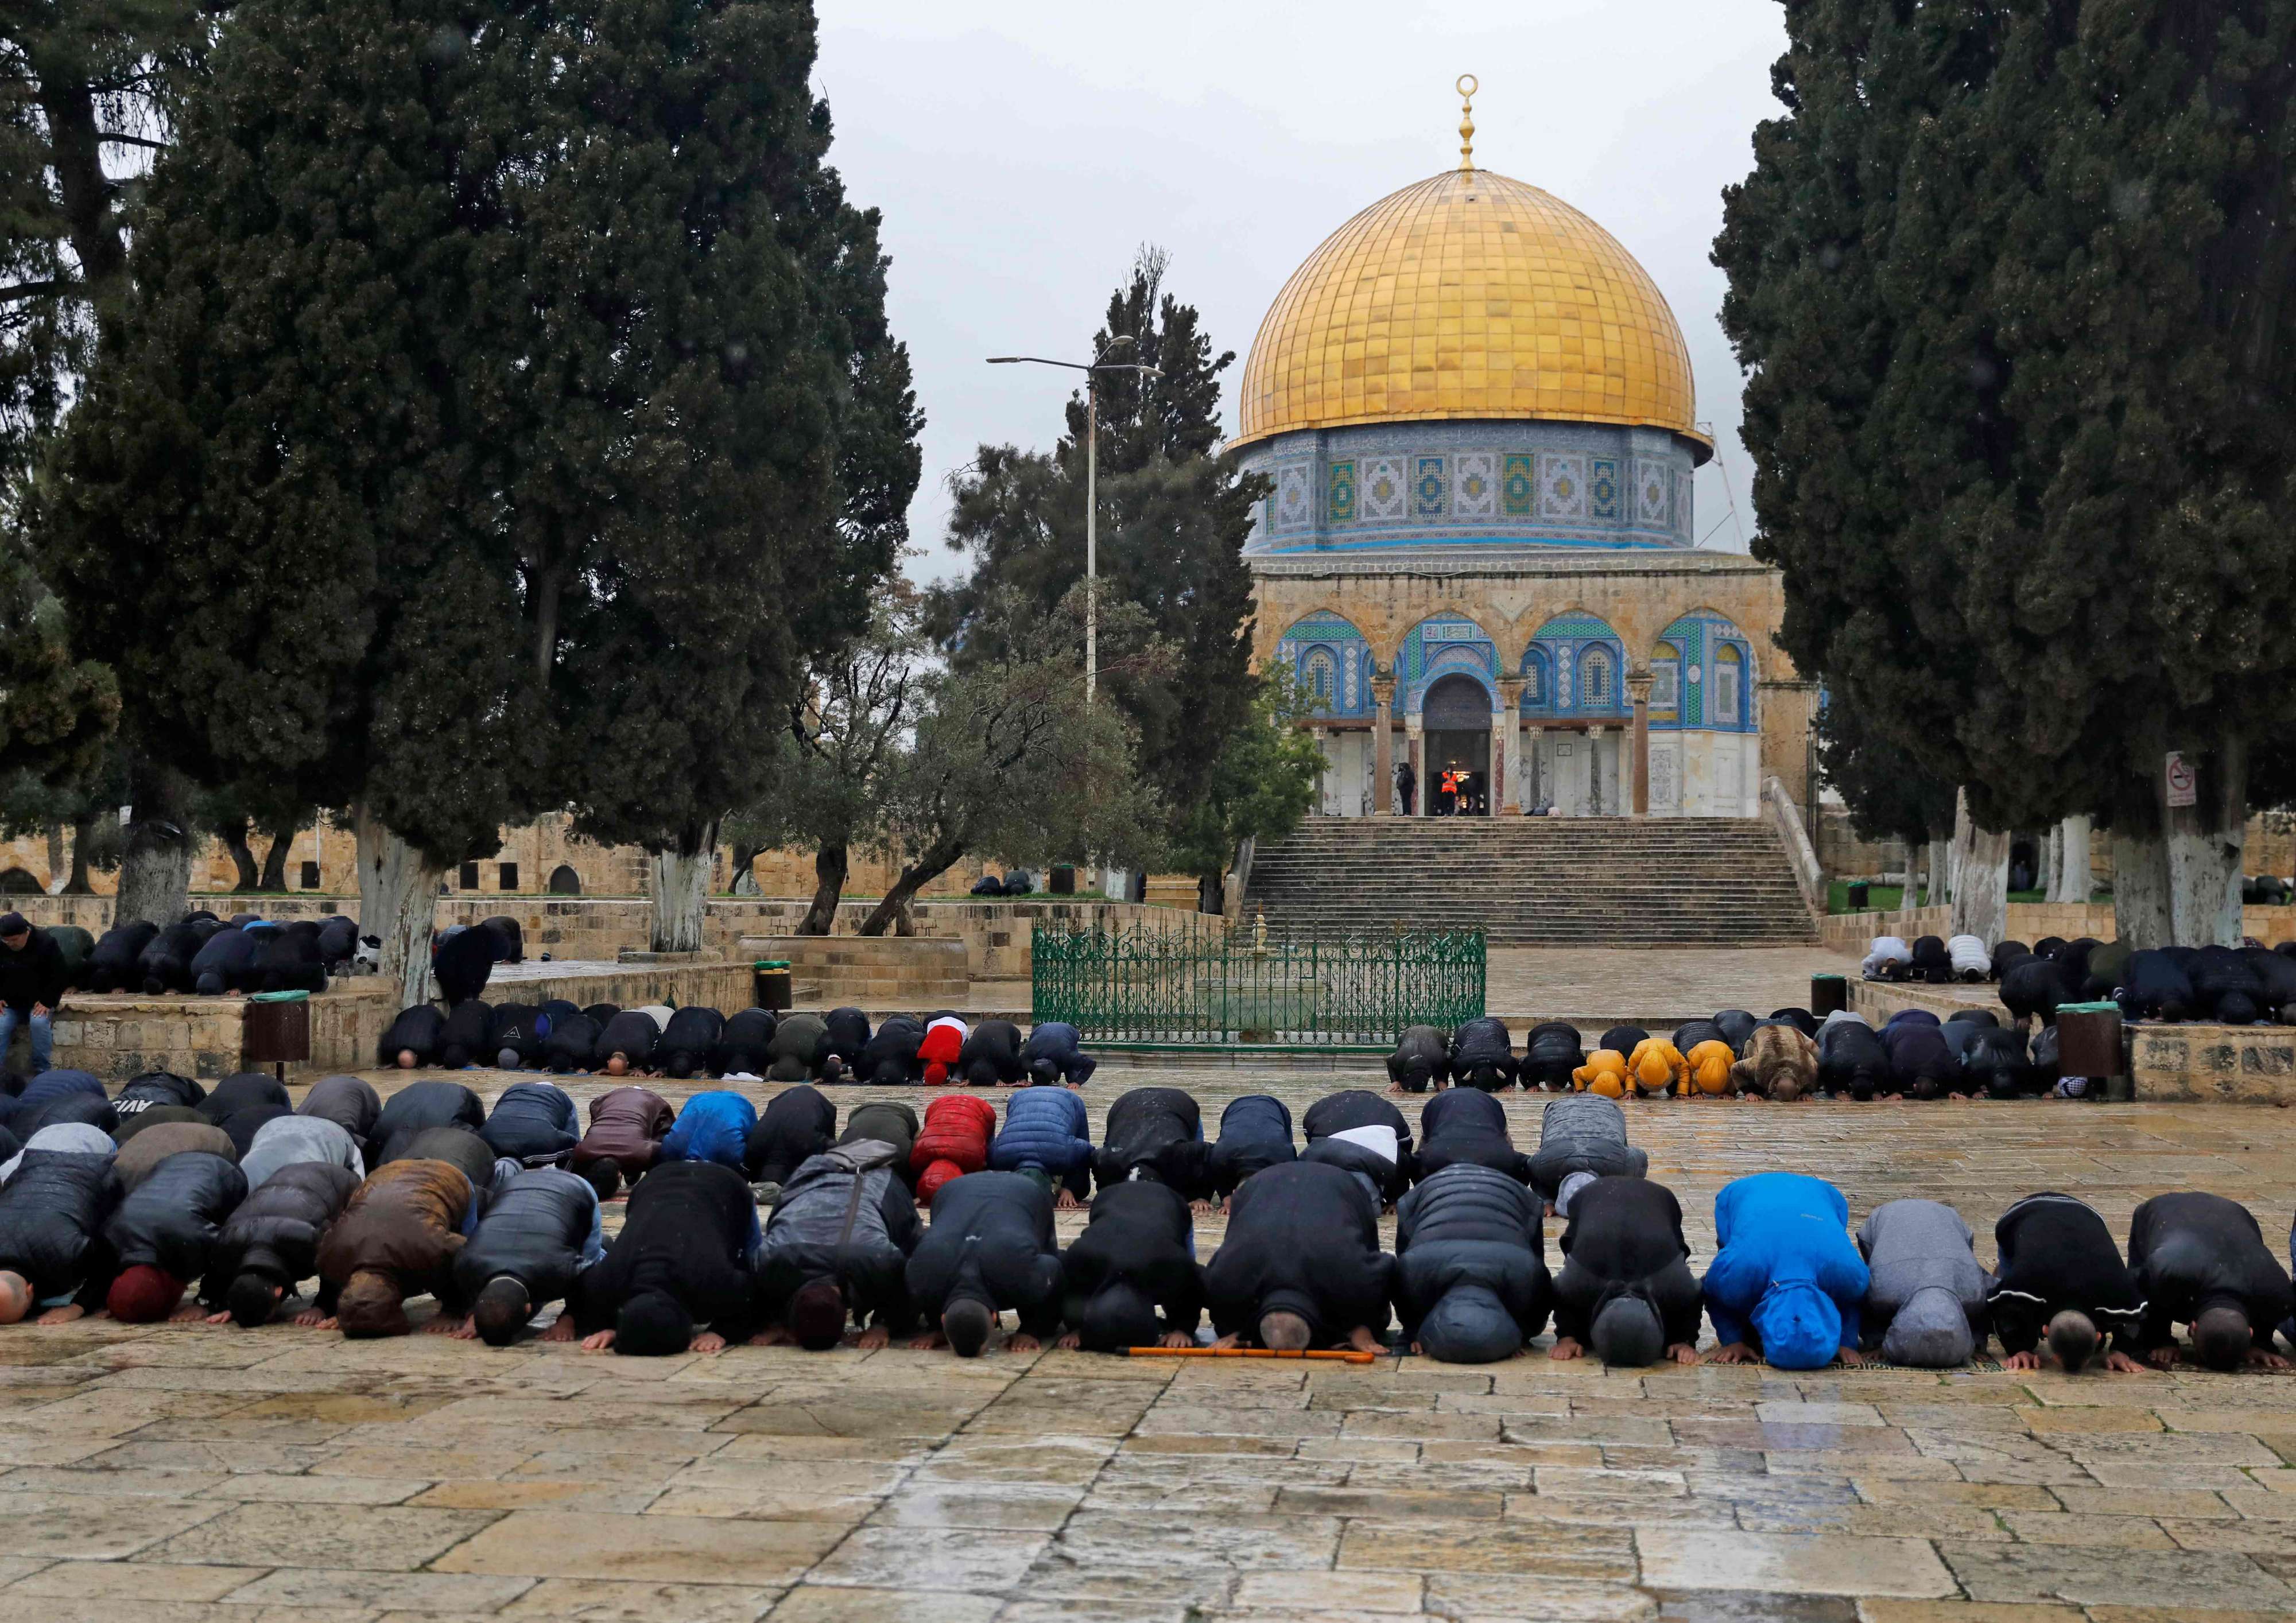 Muslim worshipers pray in a courtyard of the Al-Aqsa mosque compound, with the Dome of the Rock in the background